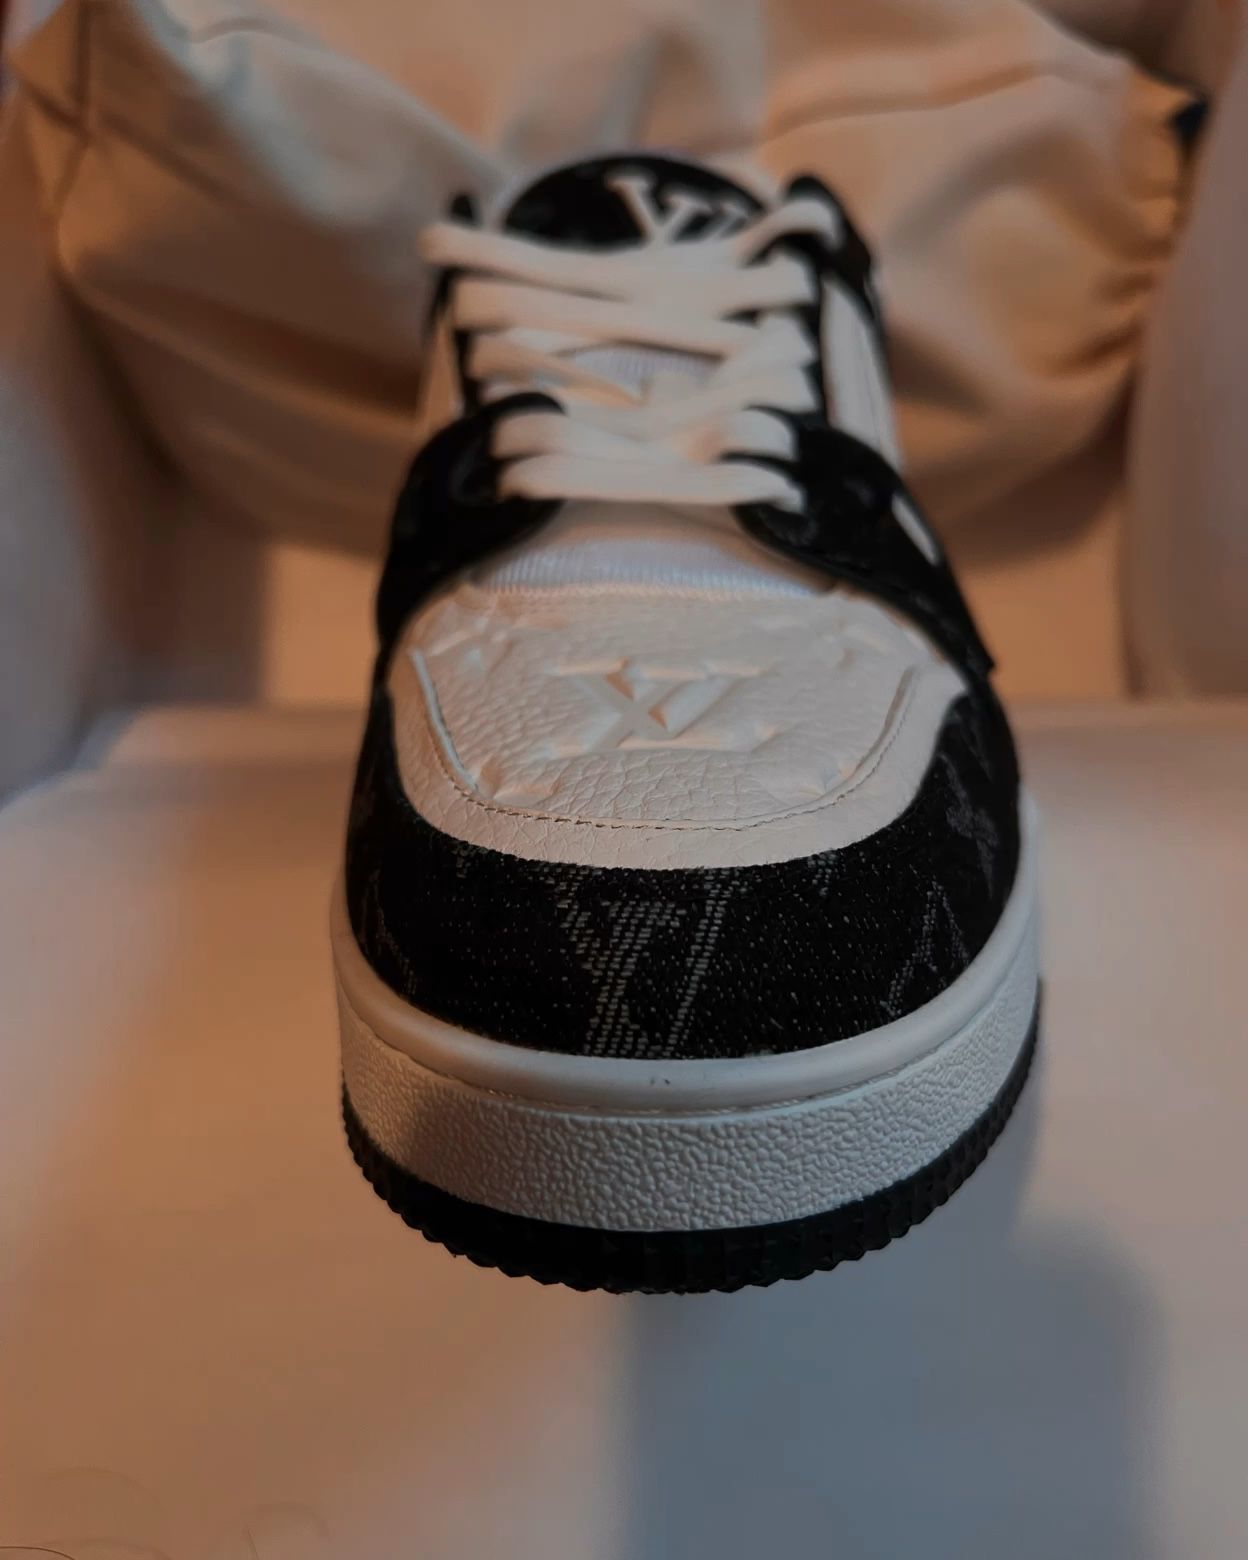 Louis Vuitton Trainer #54 for Sale in Mount Vernon, NY - OfferUp